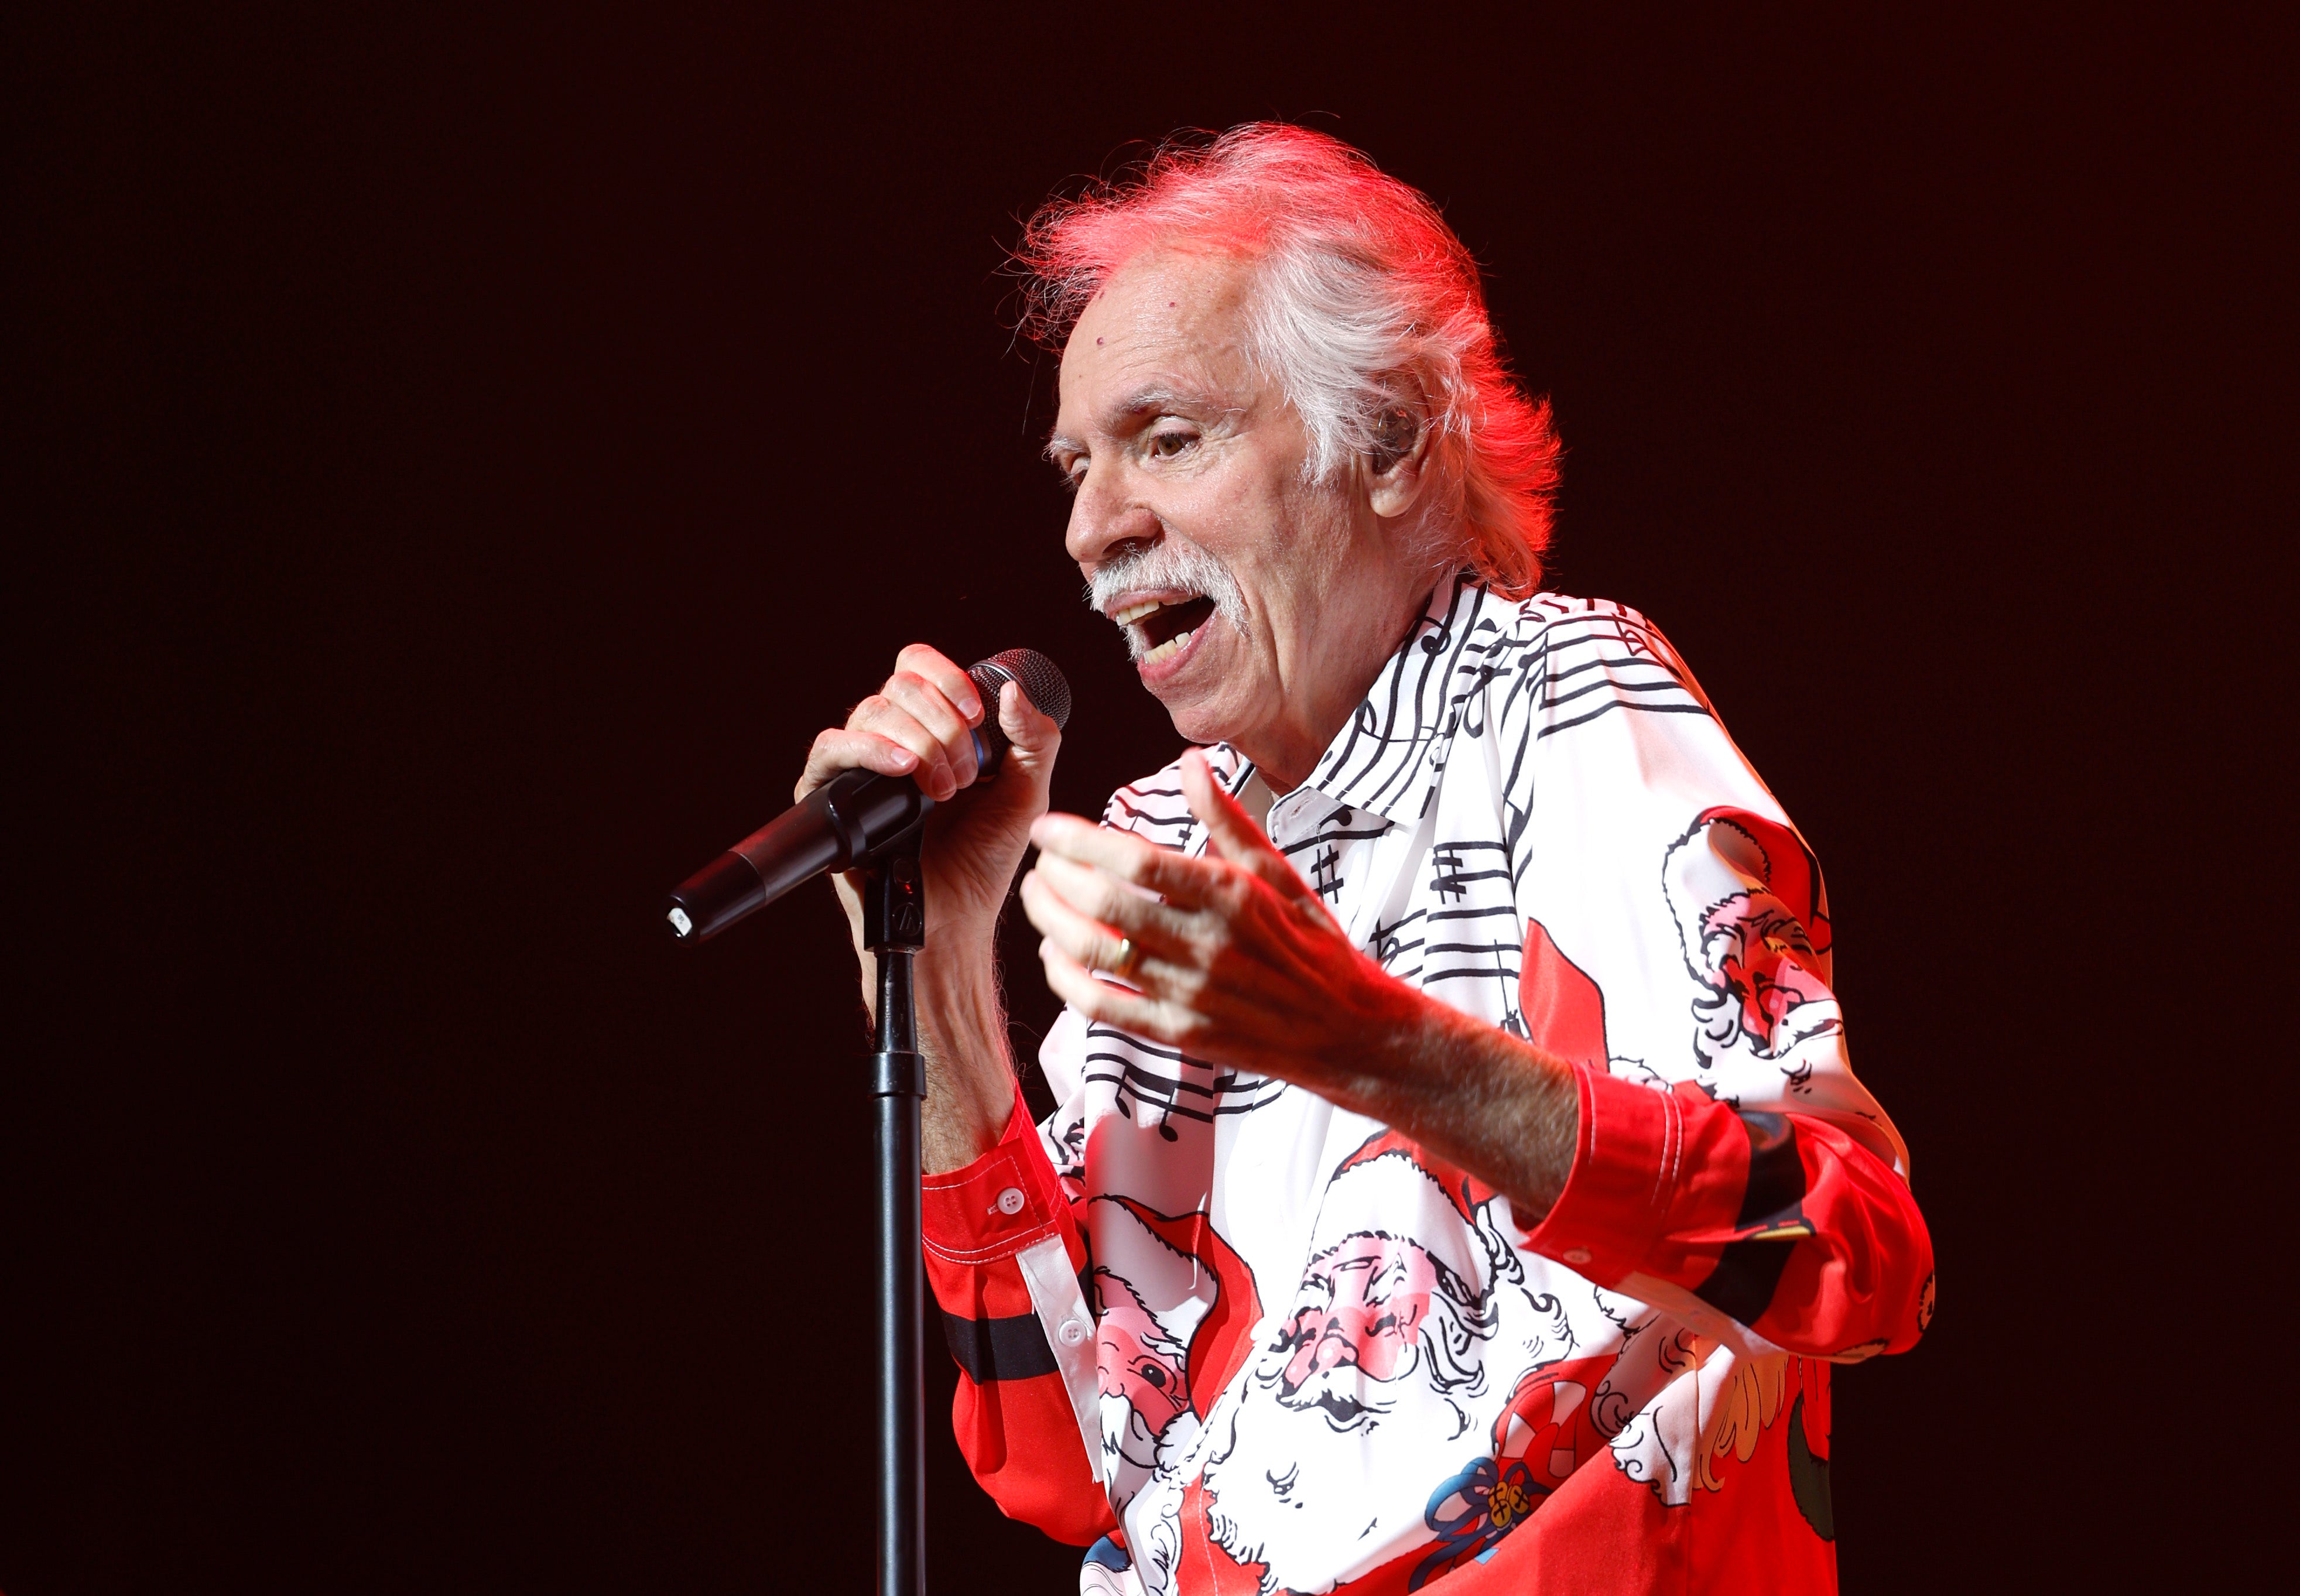 Joe Bonsall has died at the age of 76 from complications with Amyotrophic Lateral Sclerosis (ALS)